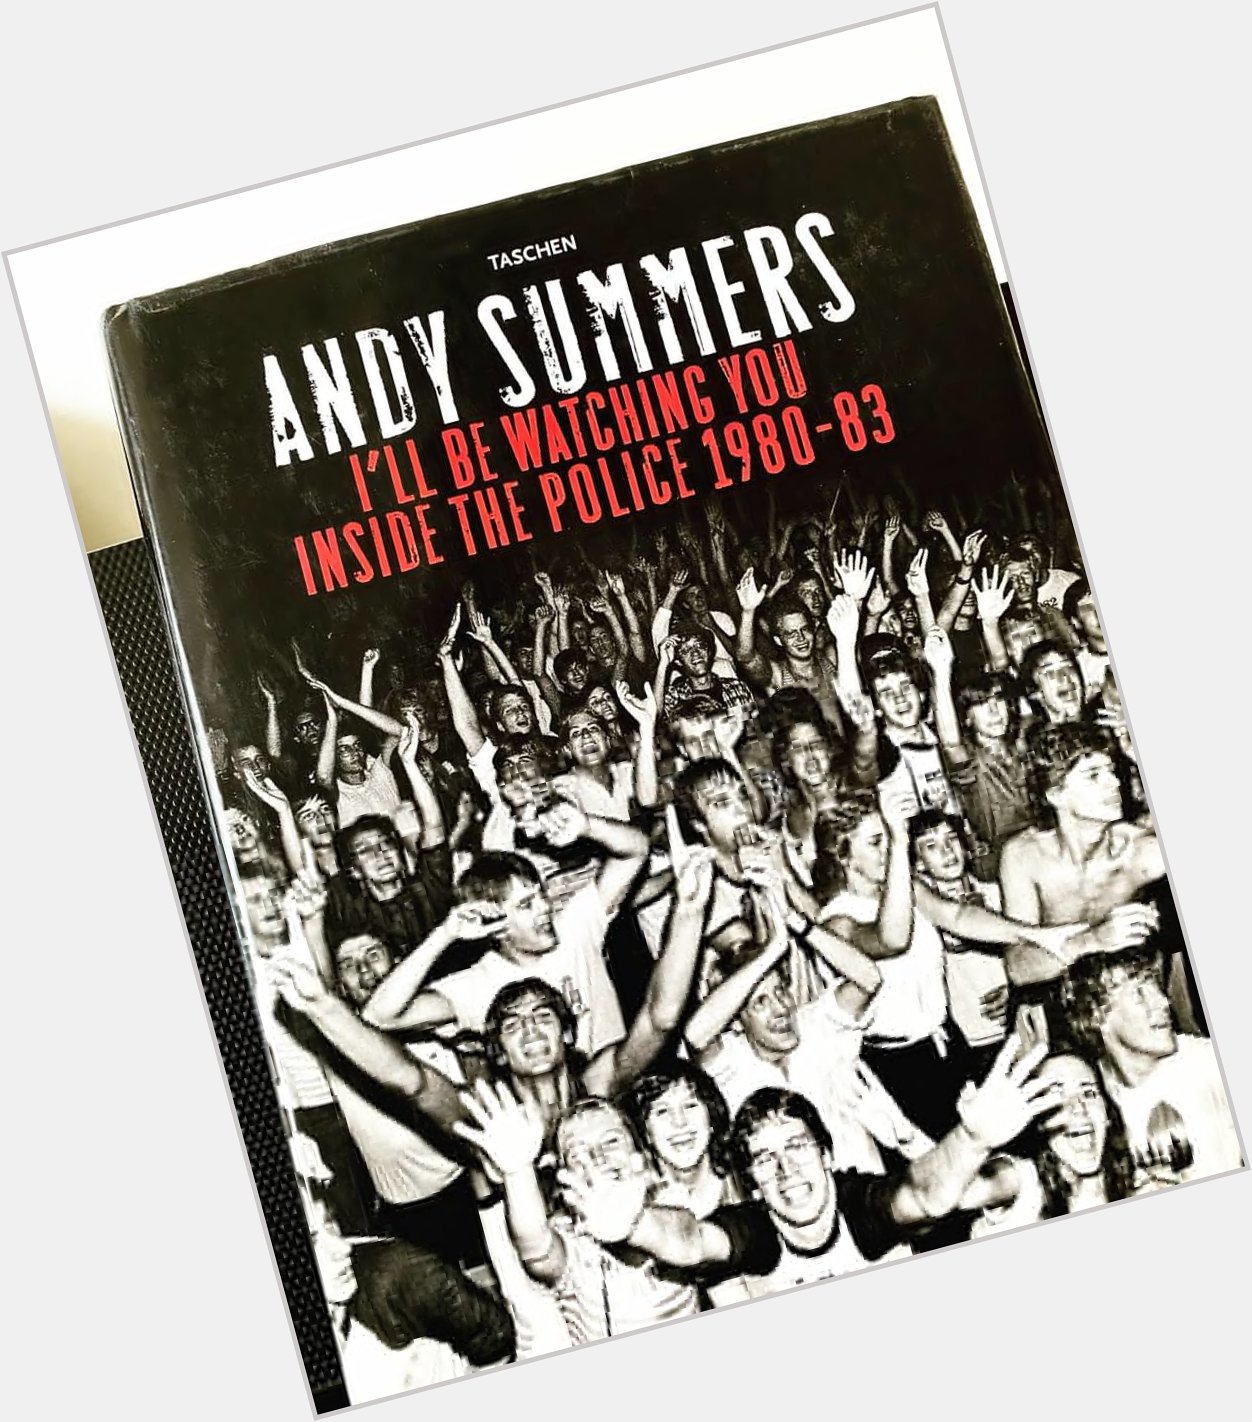 Happy to the Andy Summers of The Police 